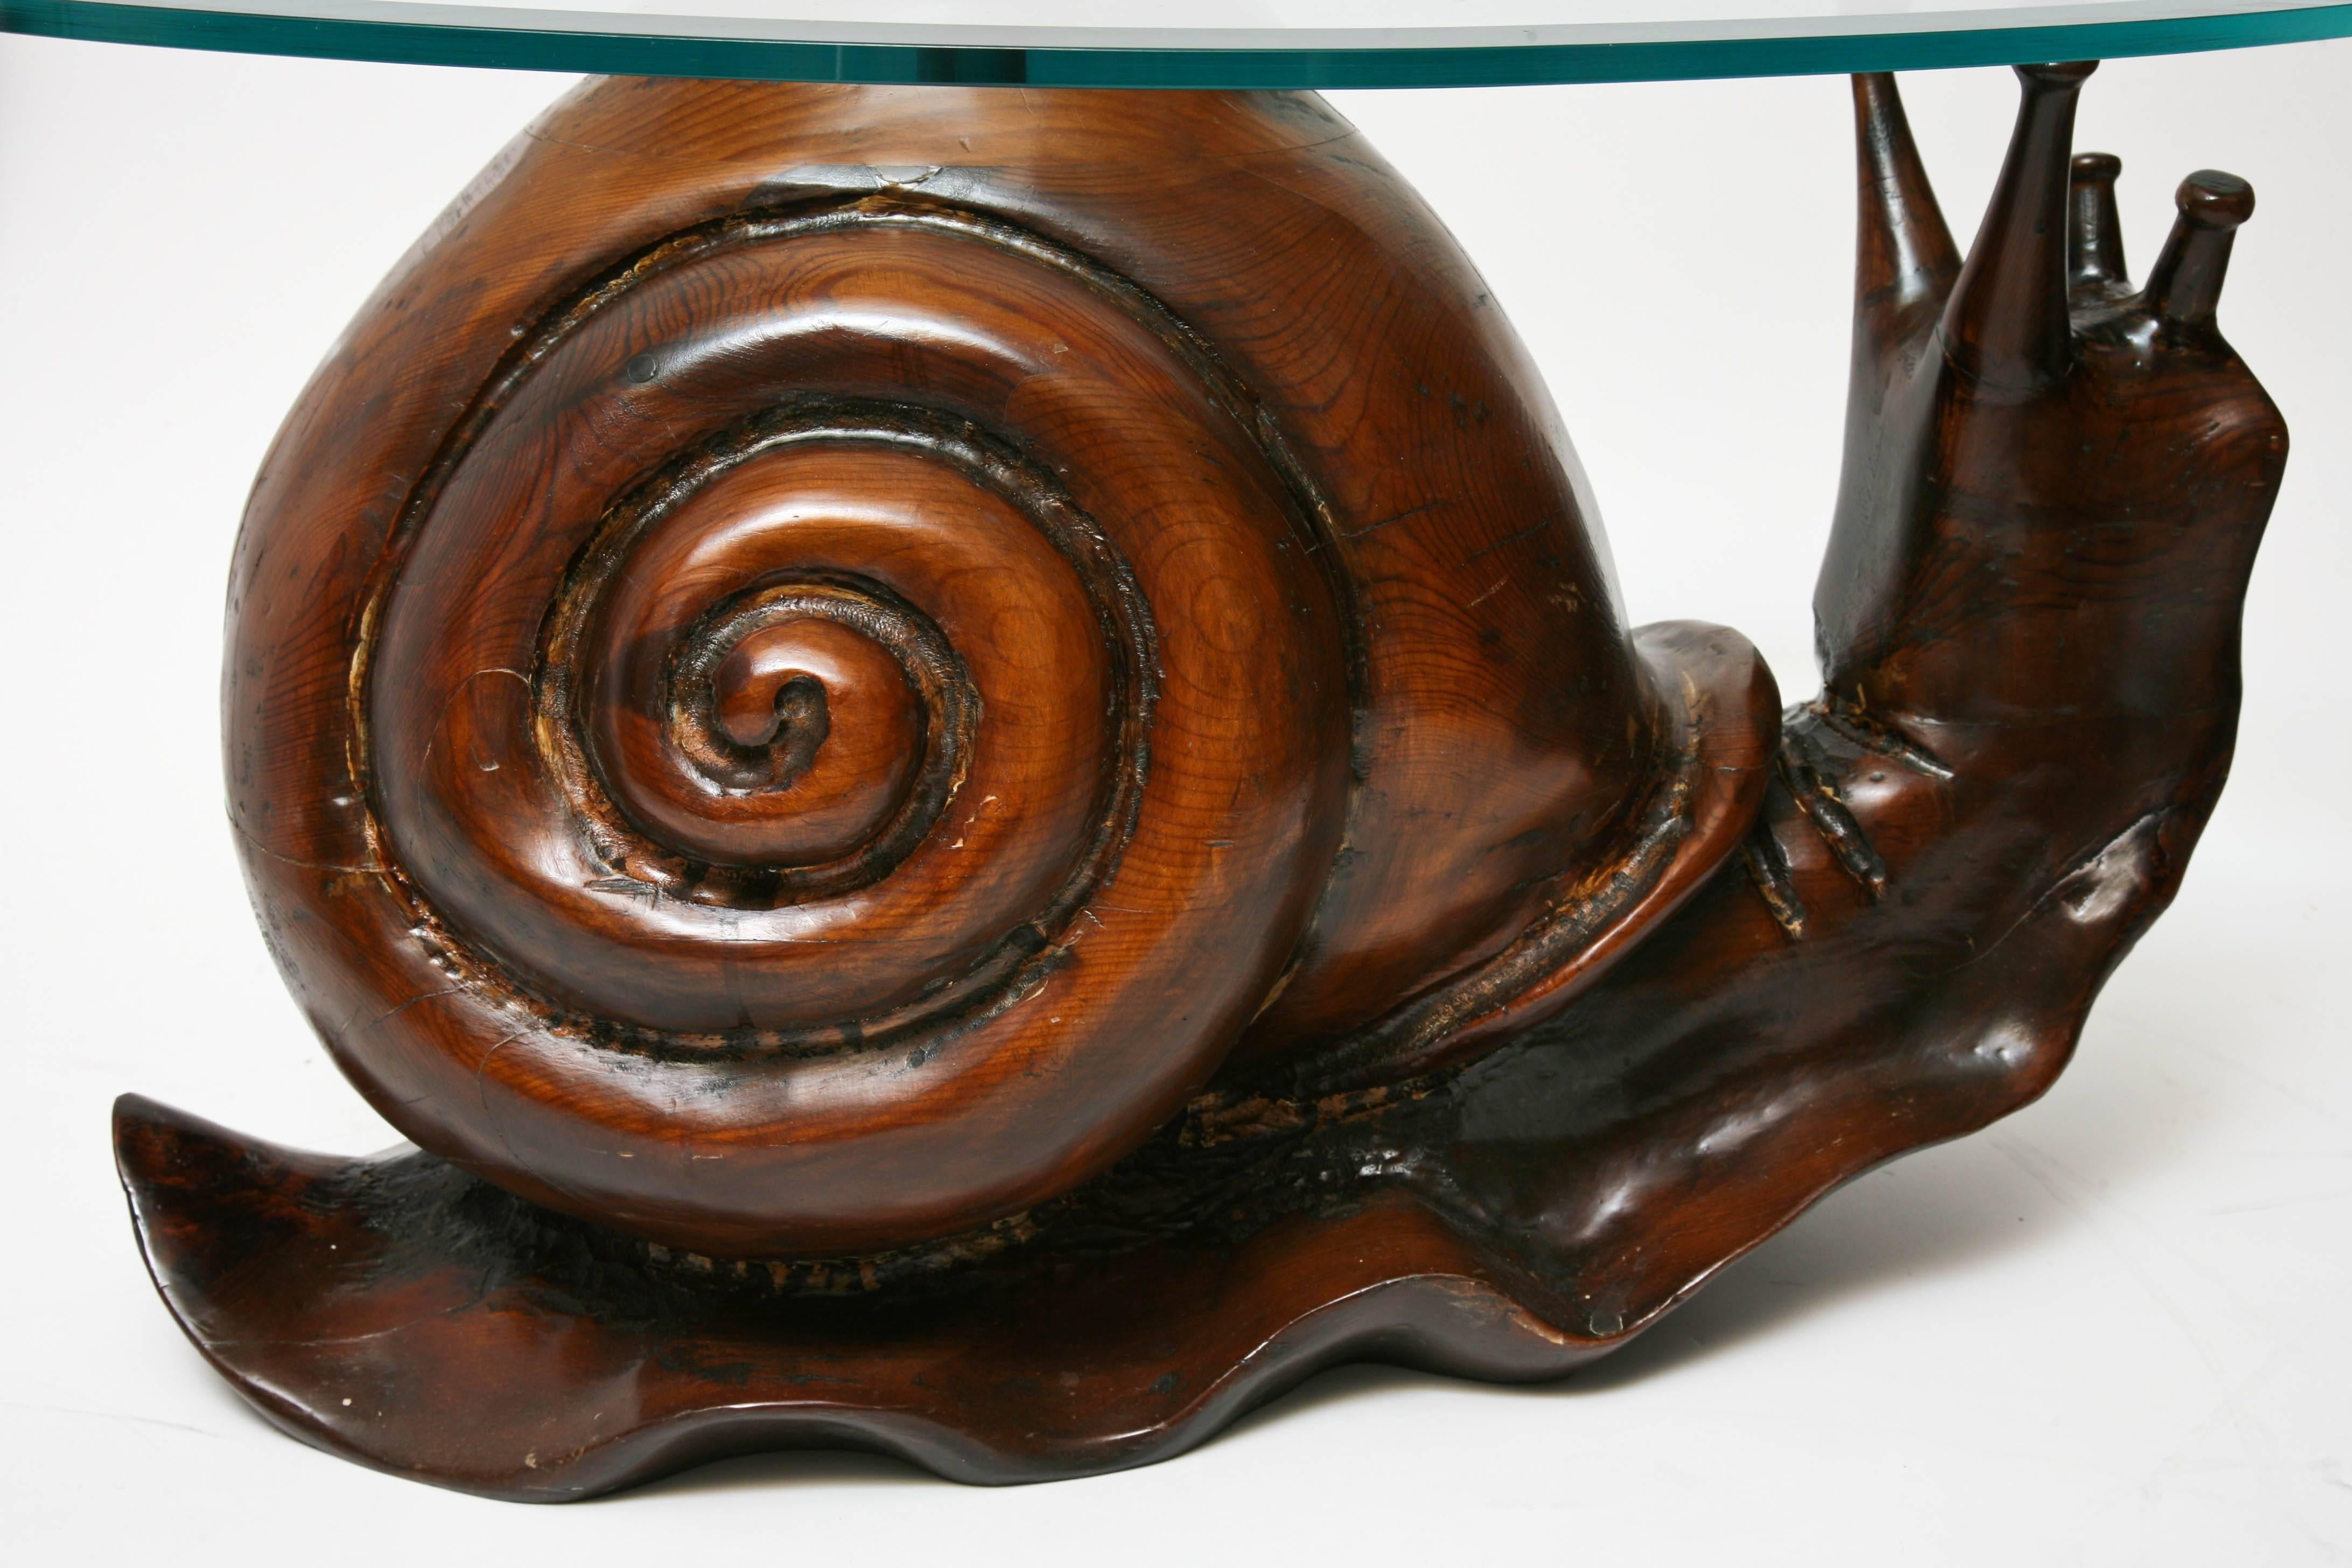 Carved Wood Snail Sculpture Table by Federico Armijo 1